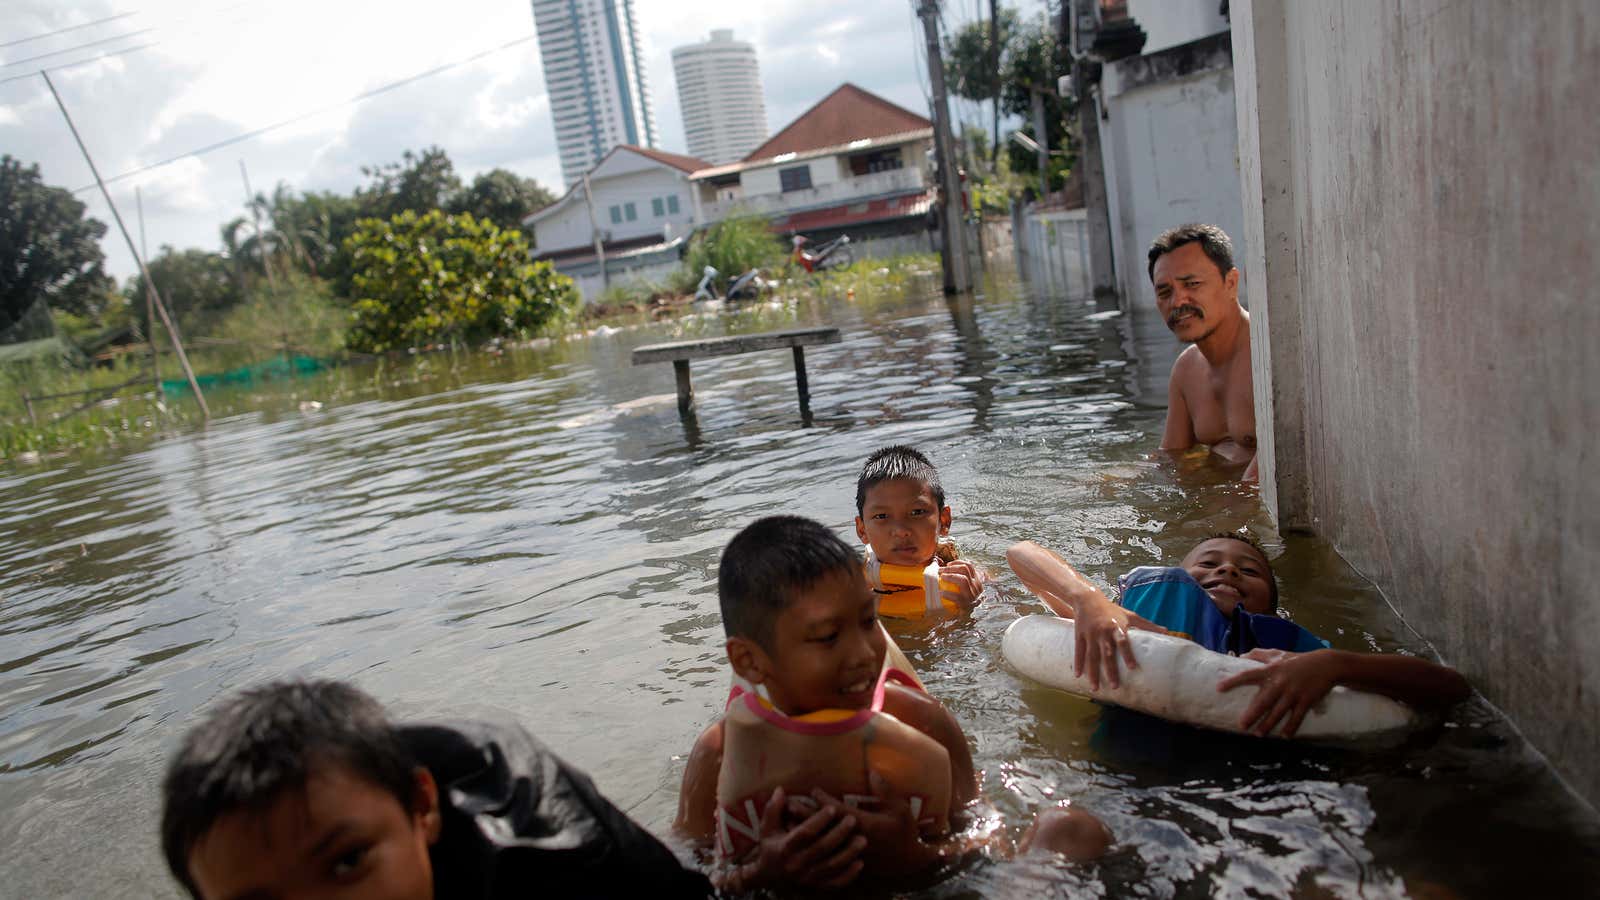 The World Bank estimates that 1.47 billion people globally are directly exposed to the risk of intense flooding.